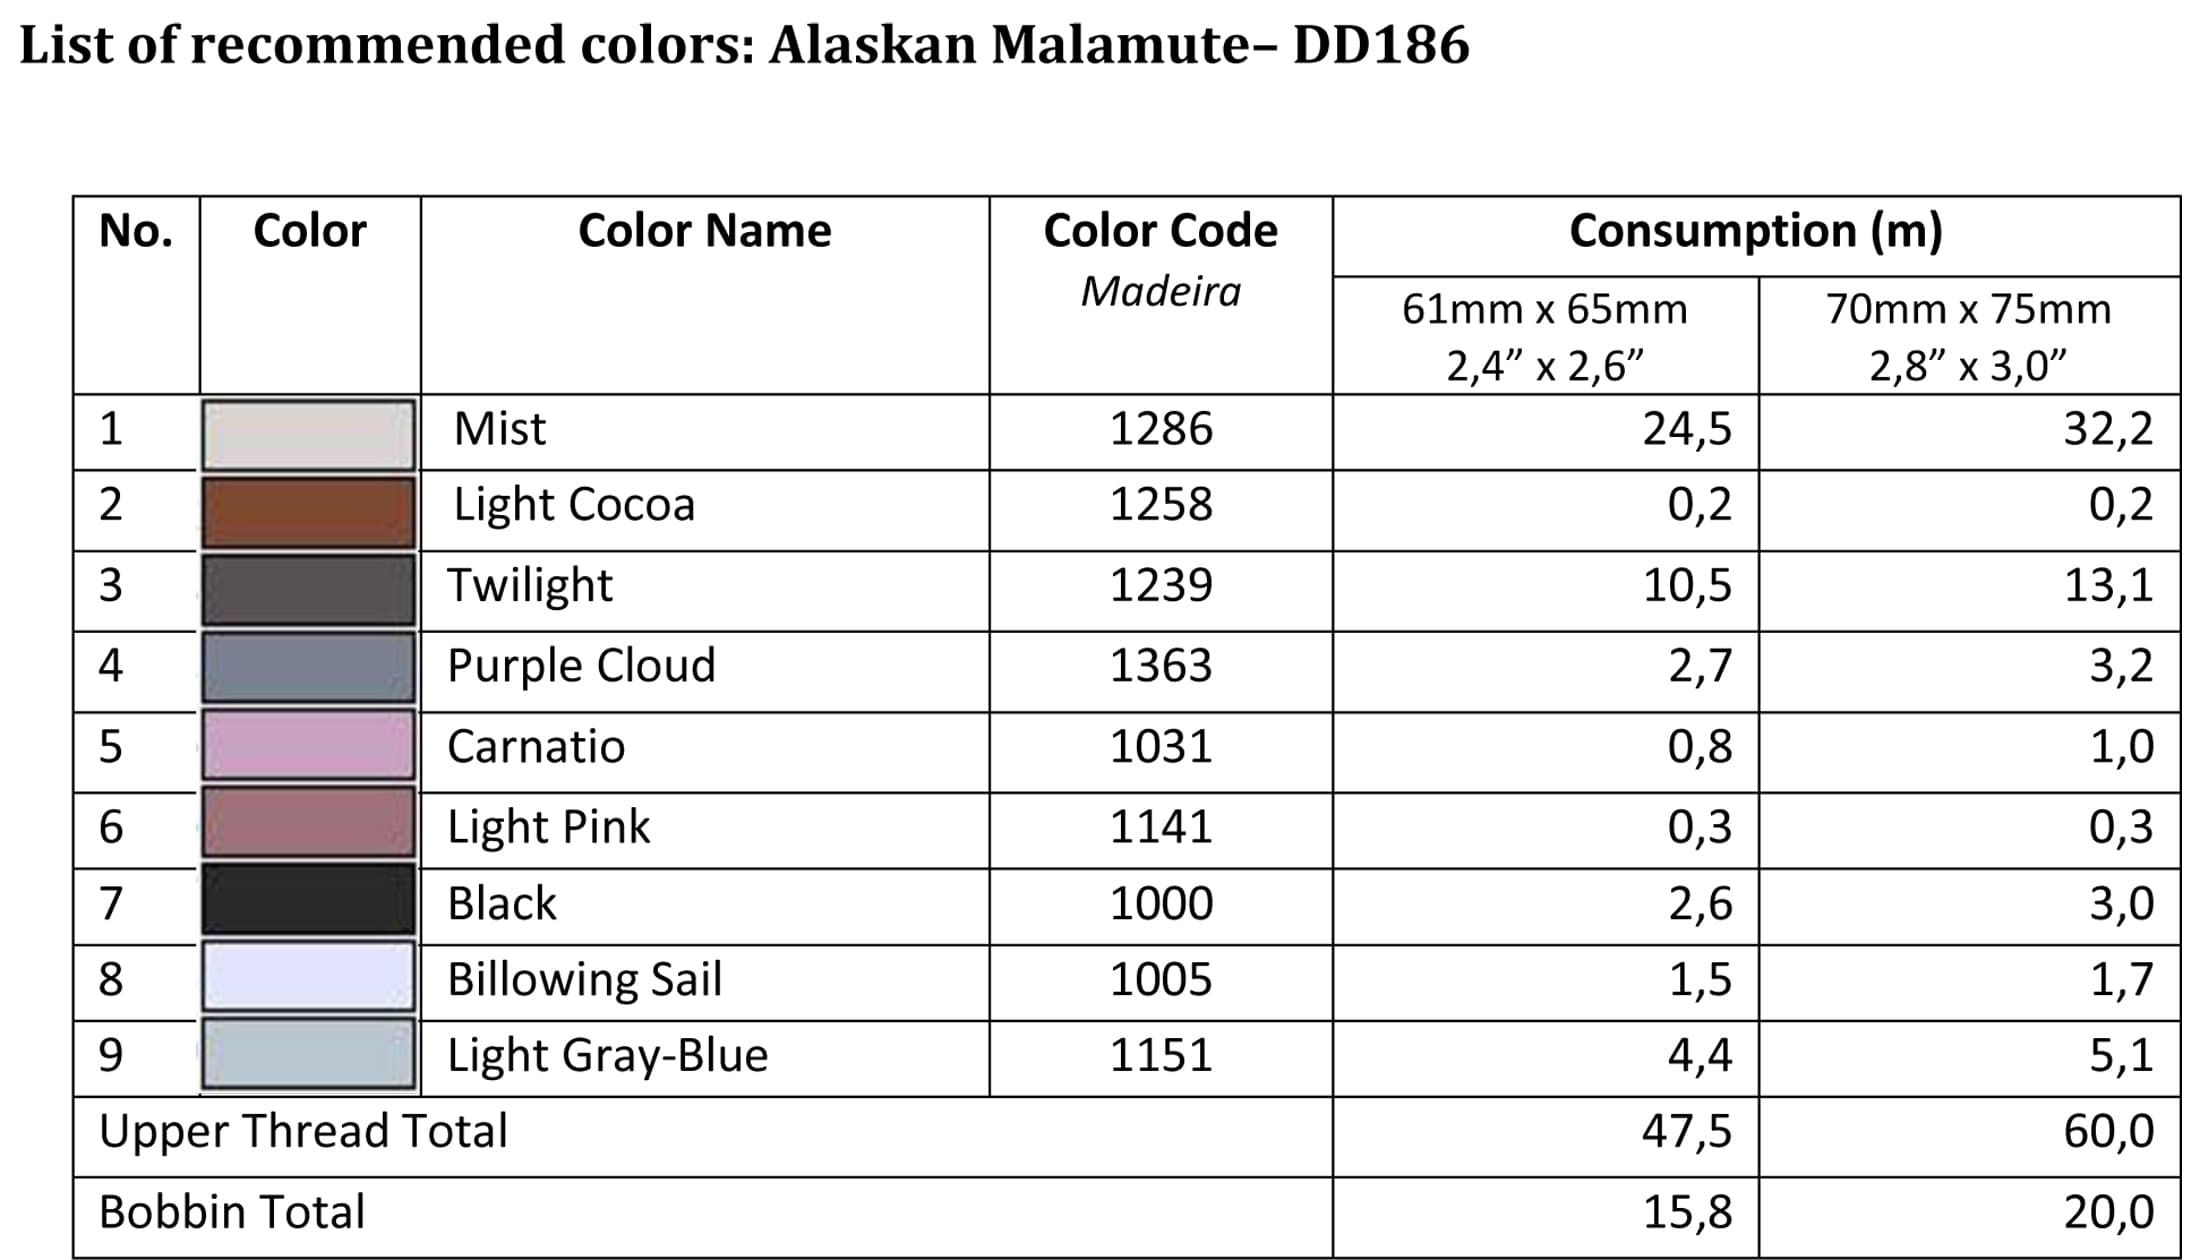 List of recommended colors - DD186